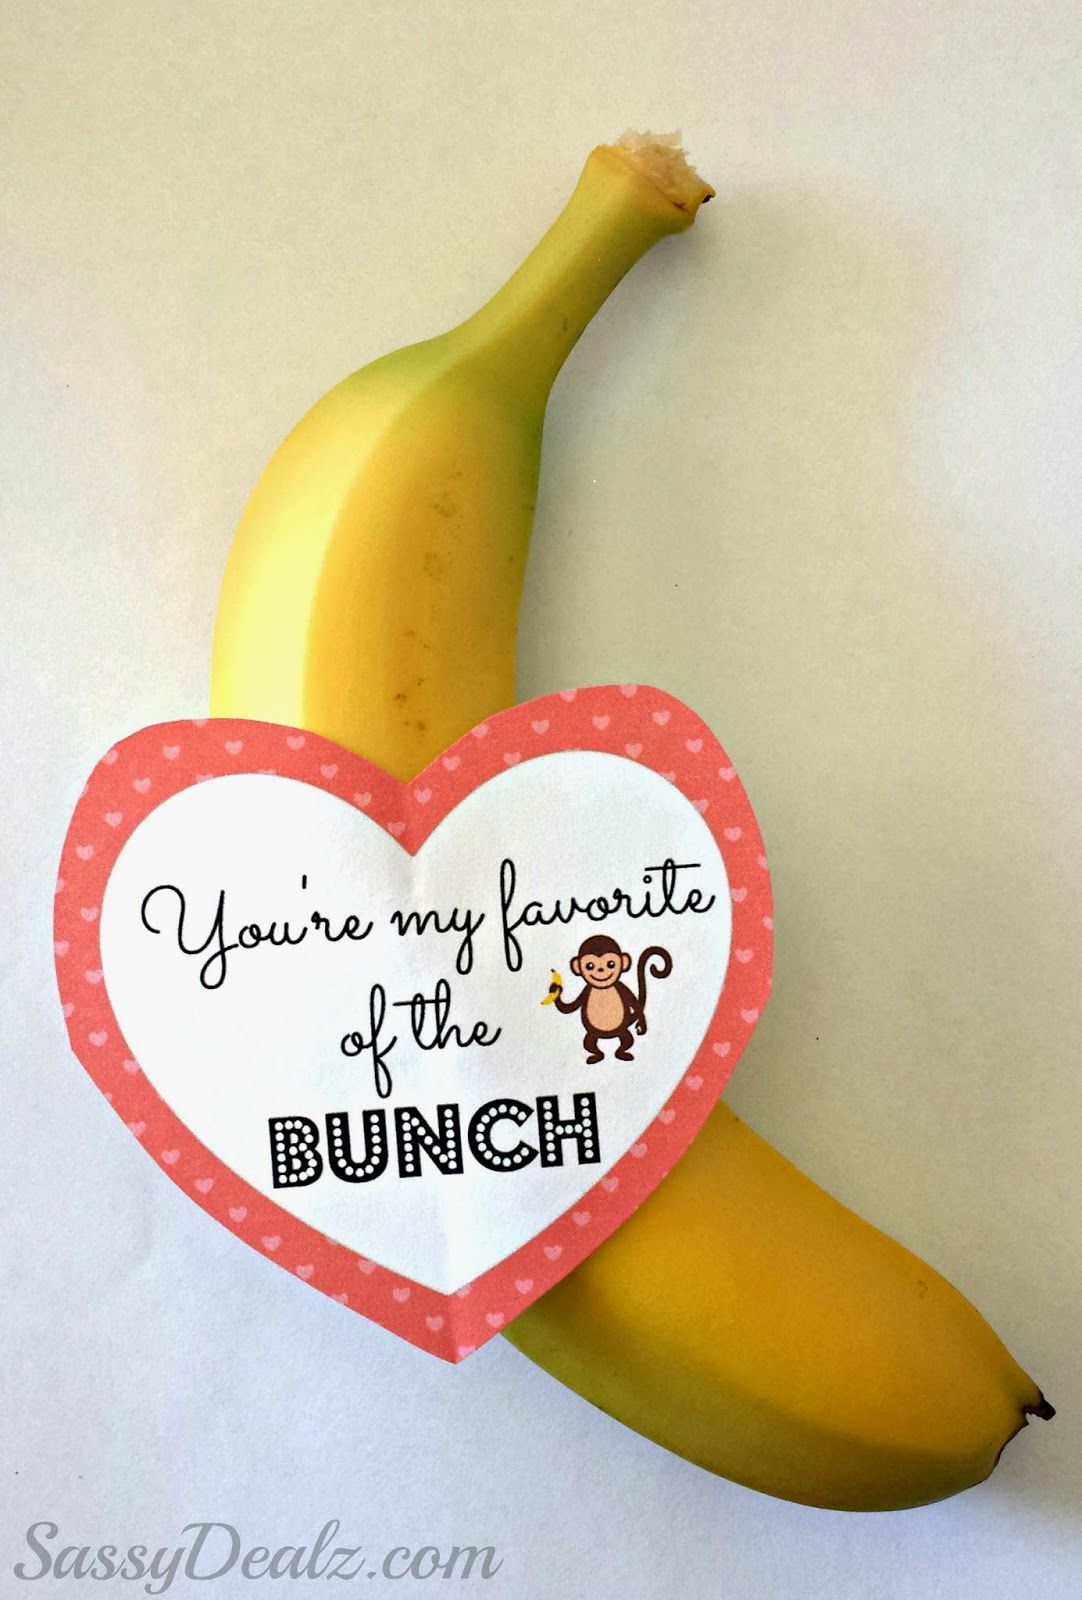 DIY Banana Valentine's Day Gift Idea - "You're My Favorite of the Bunch"